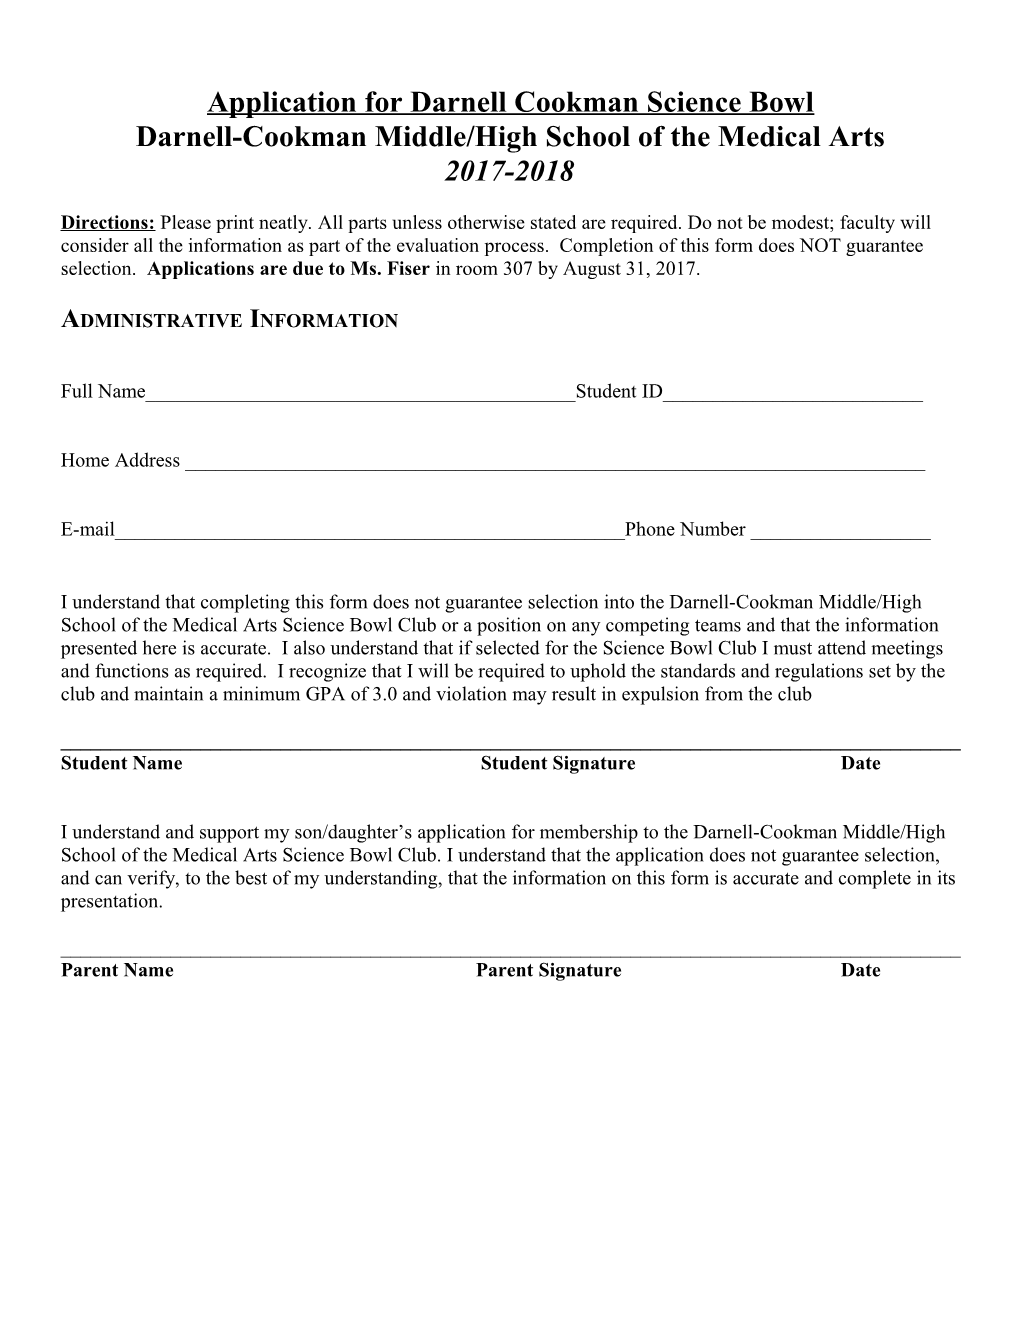 Application for National Honor Society s1